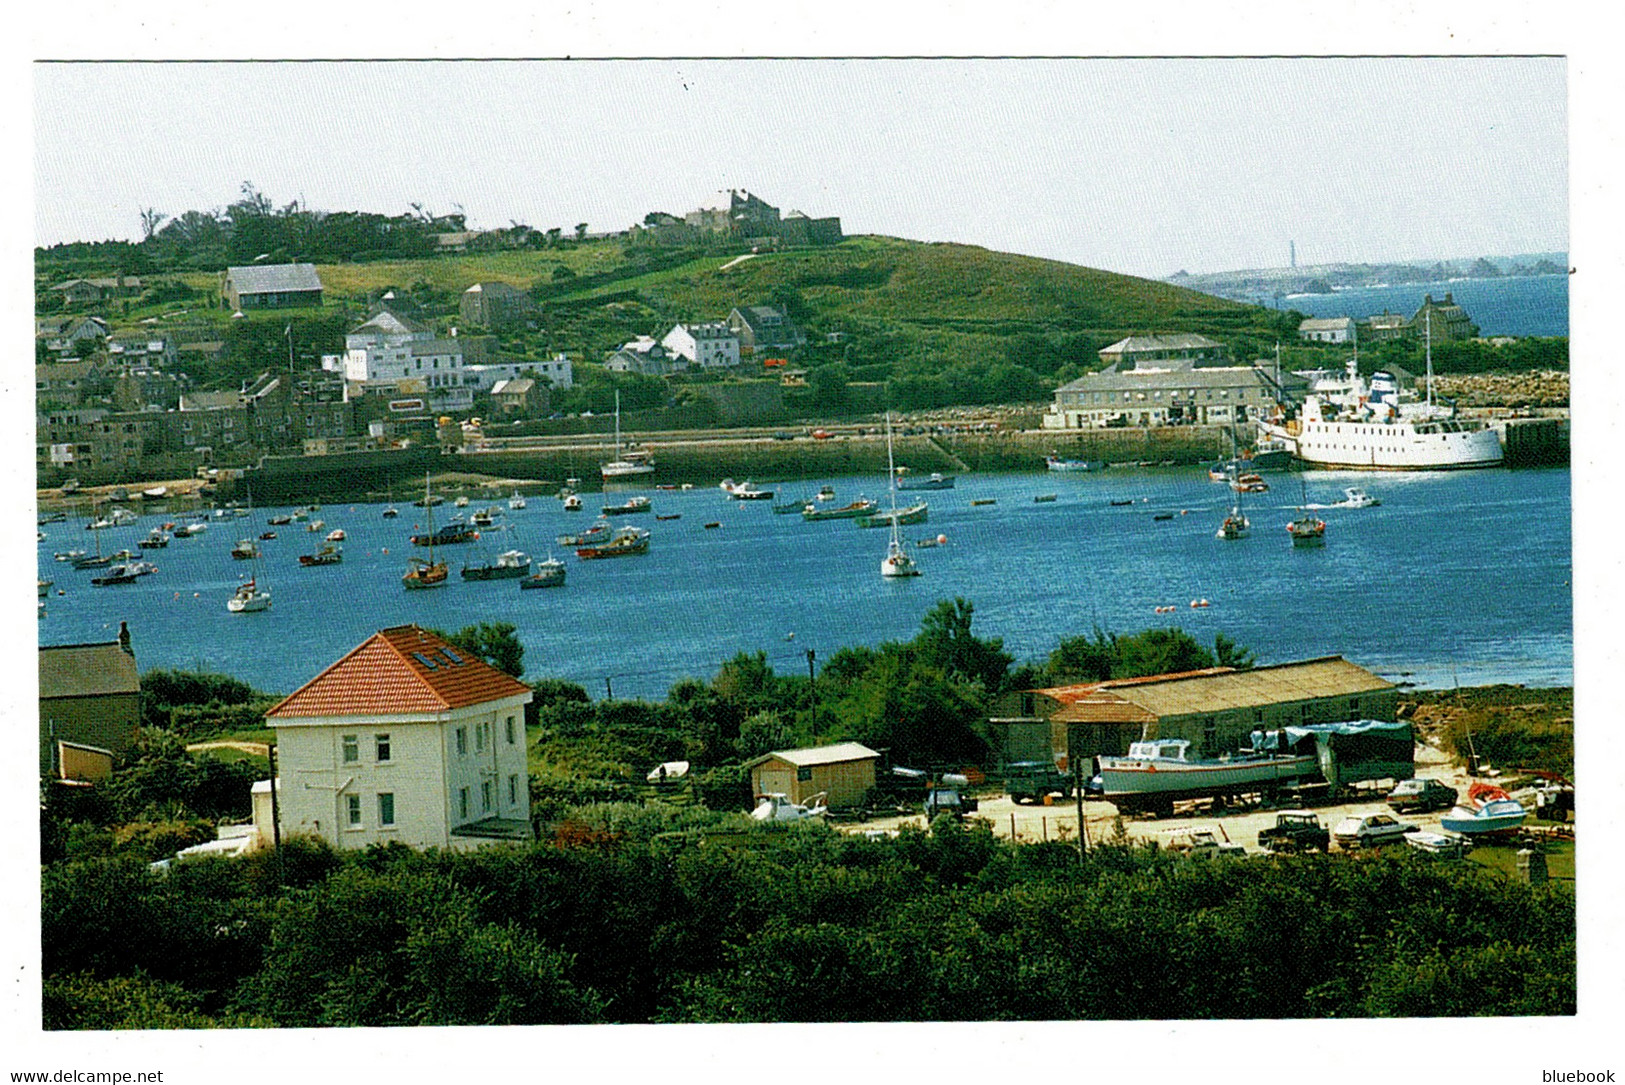 Ref 1471 - Postcard - Porthloo & Ferry At St Mary's - Isles Of Scilly - Scilly Isles